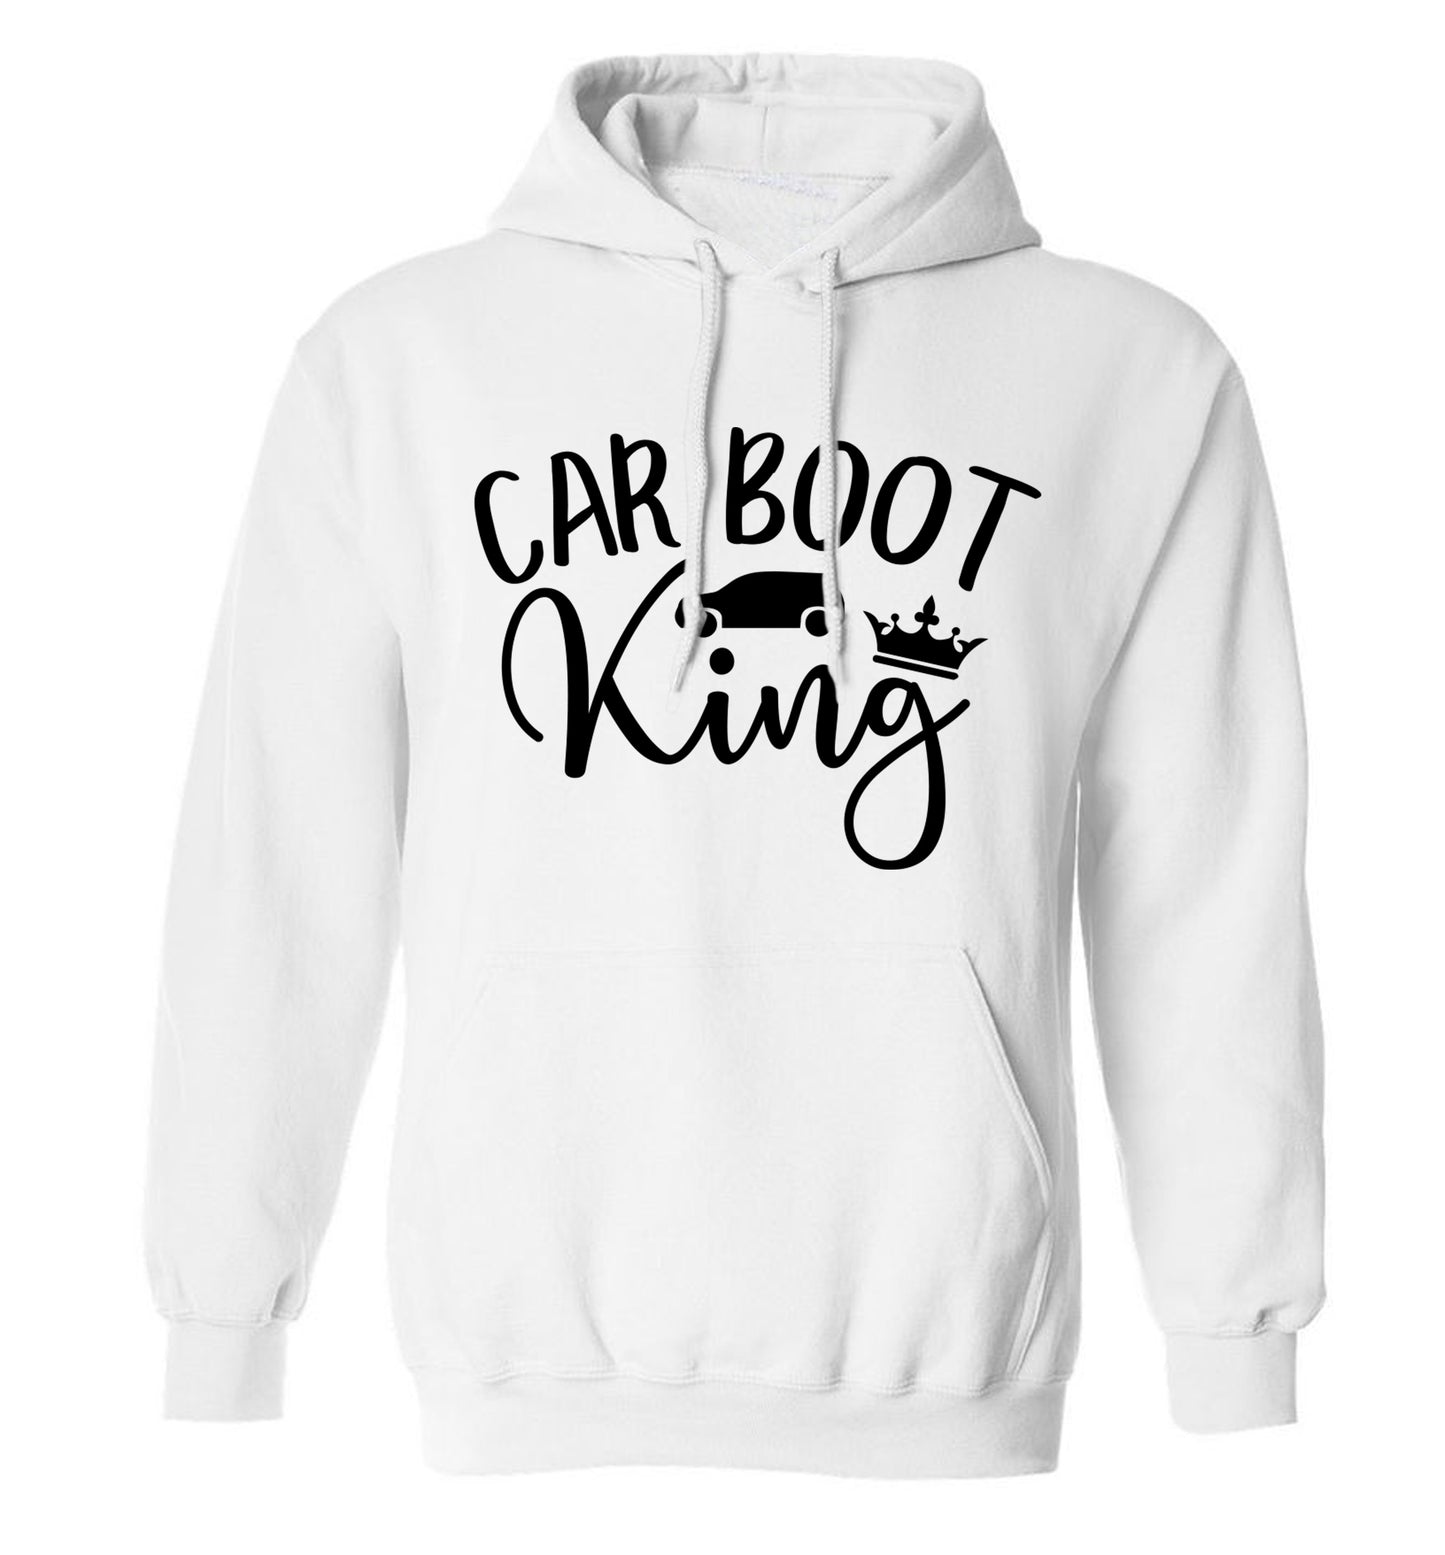 Carboot King adults unisex white hoodie 2XL